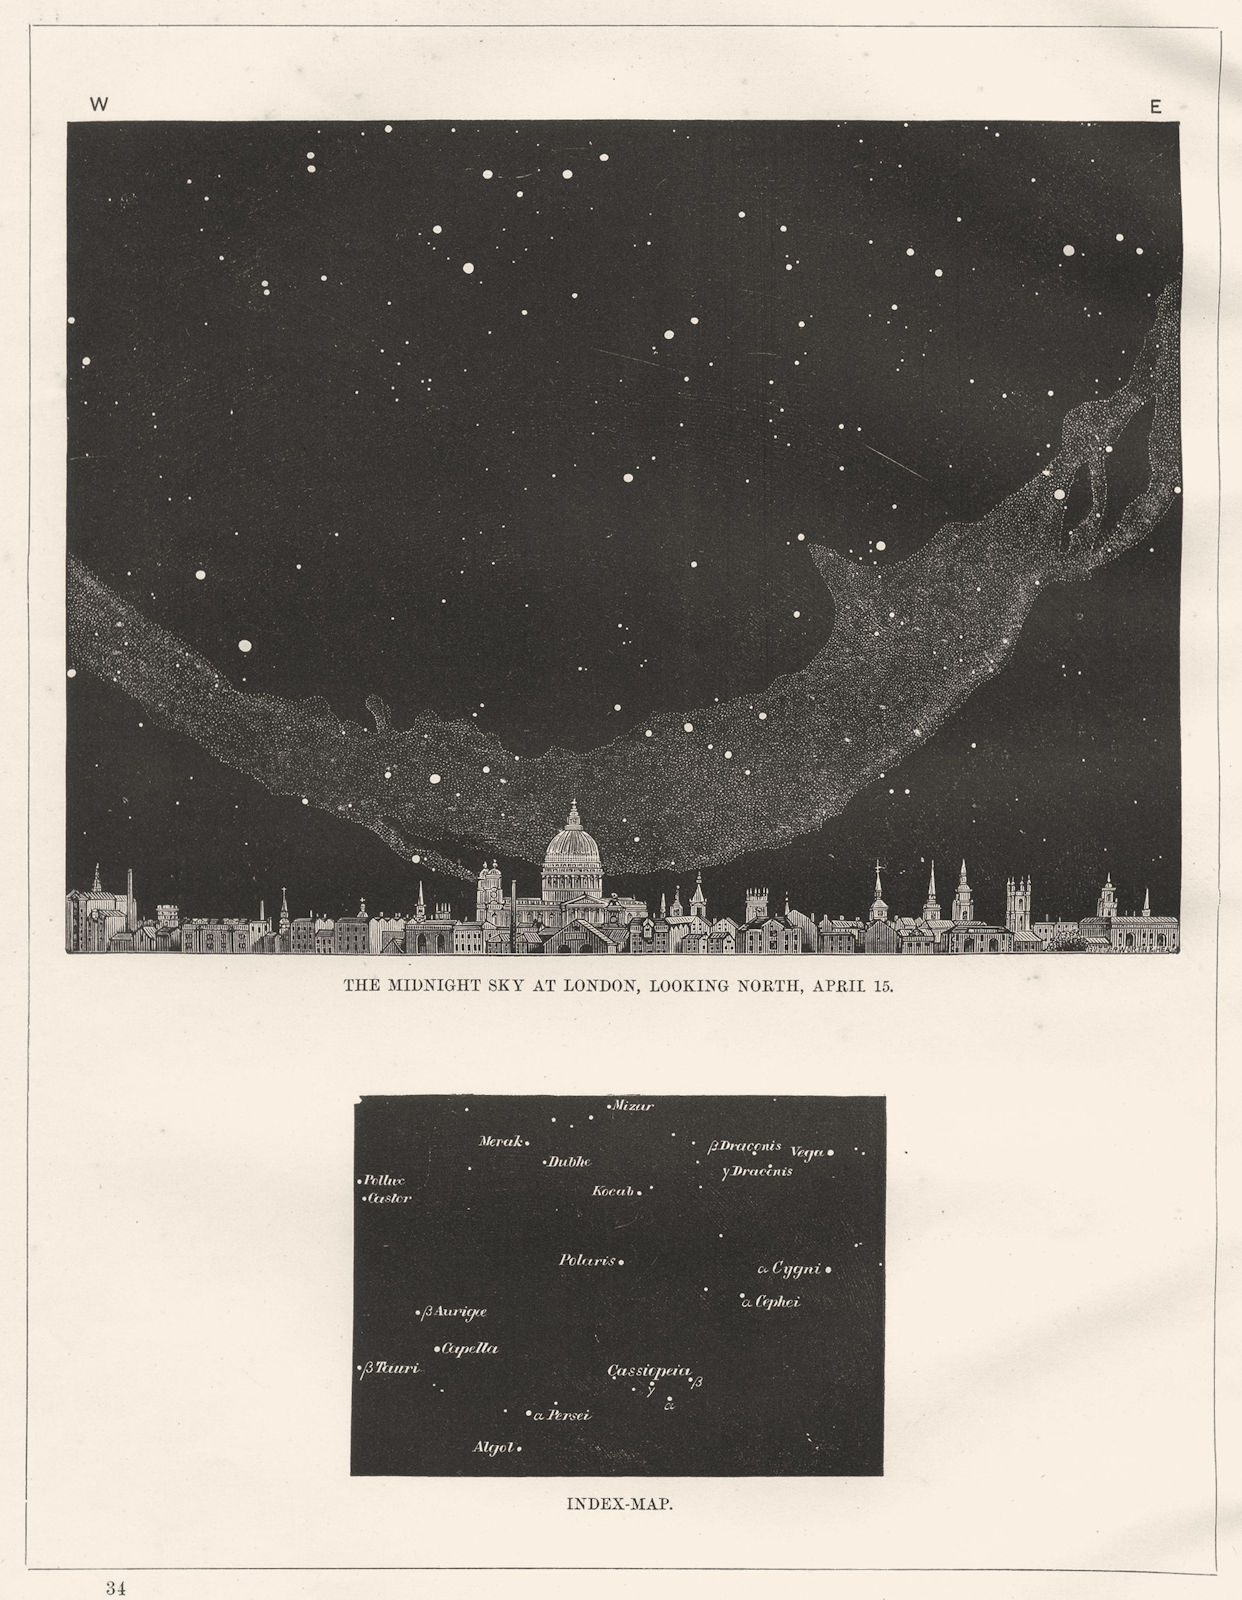 The Midnight Sky at London. Looking North, April 15. St Paul's 1869 old print